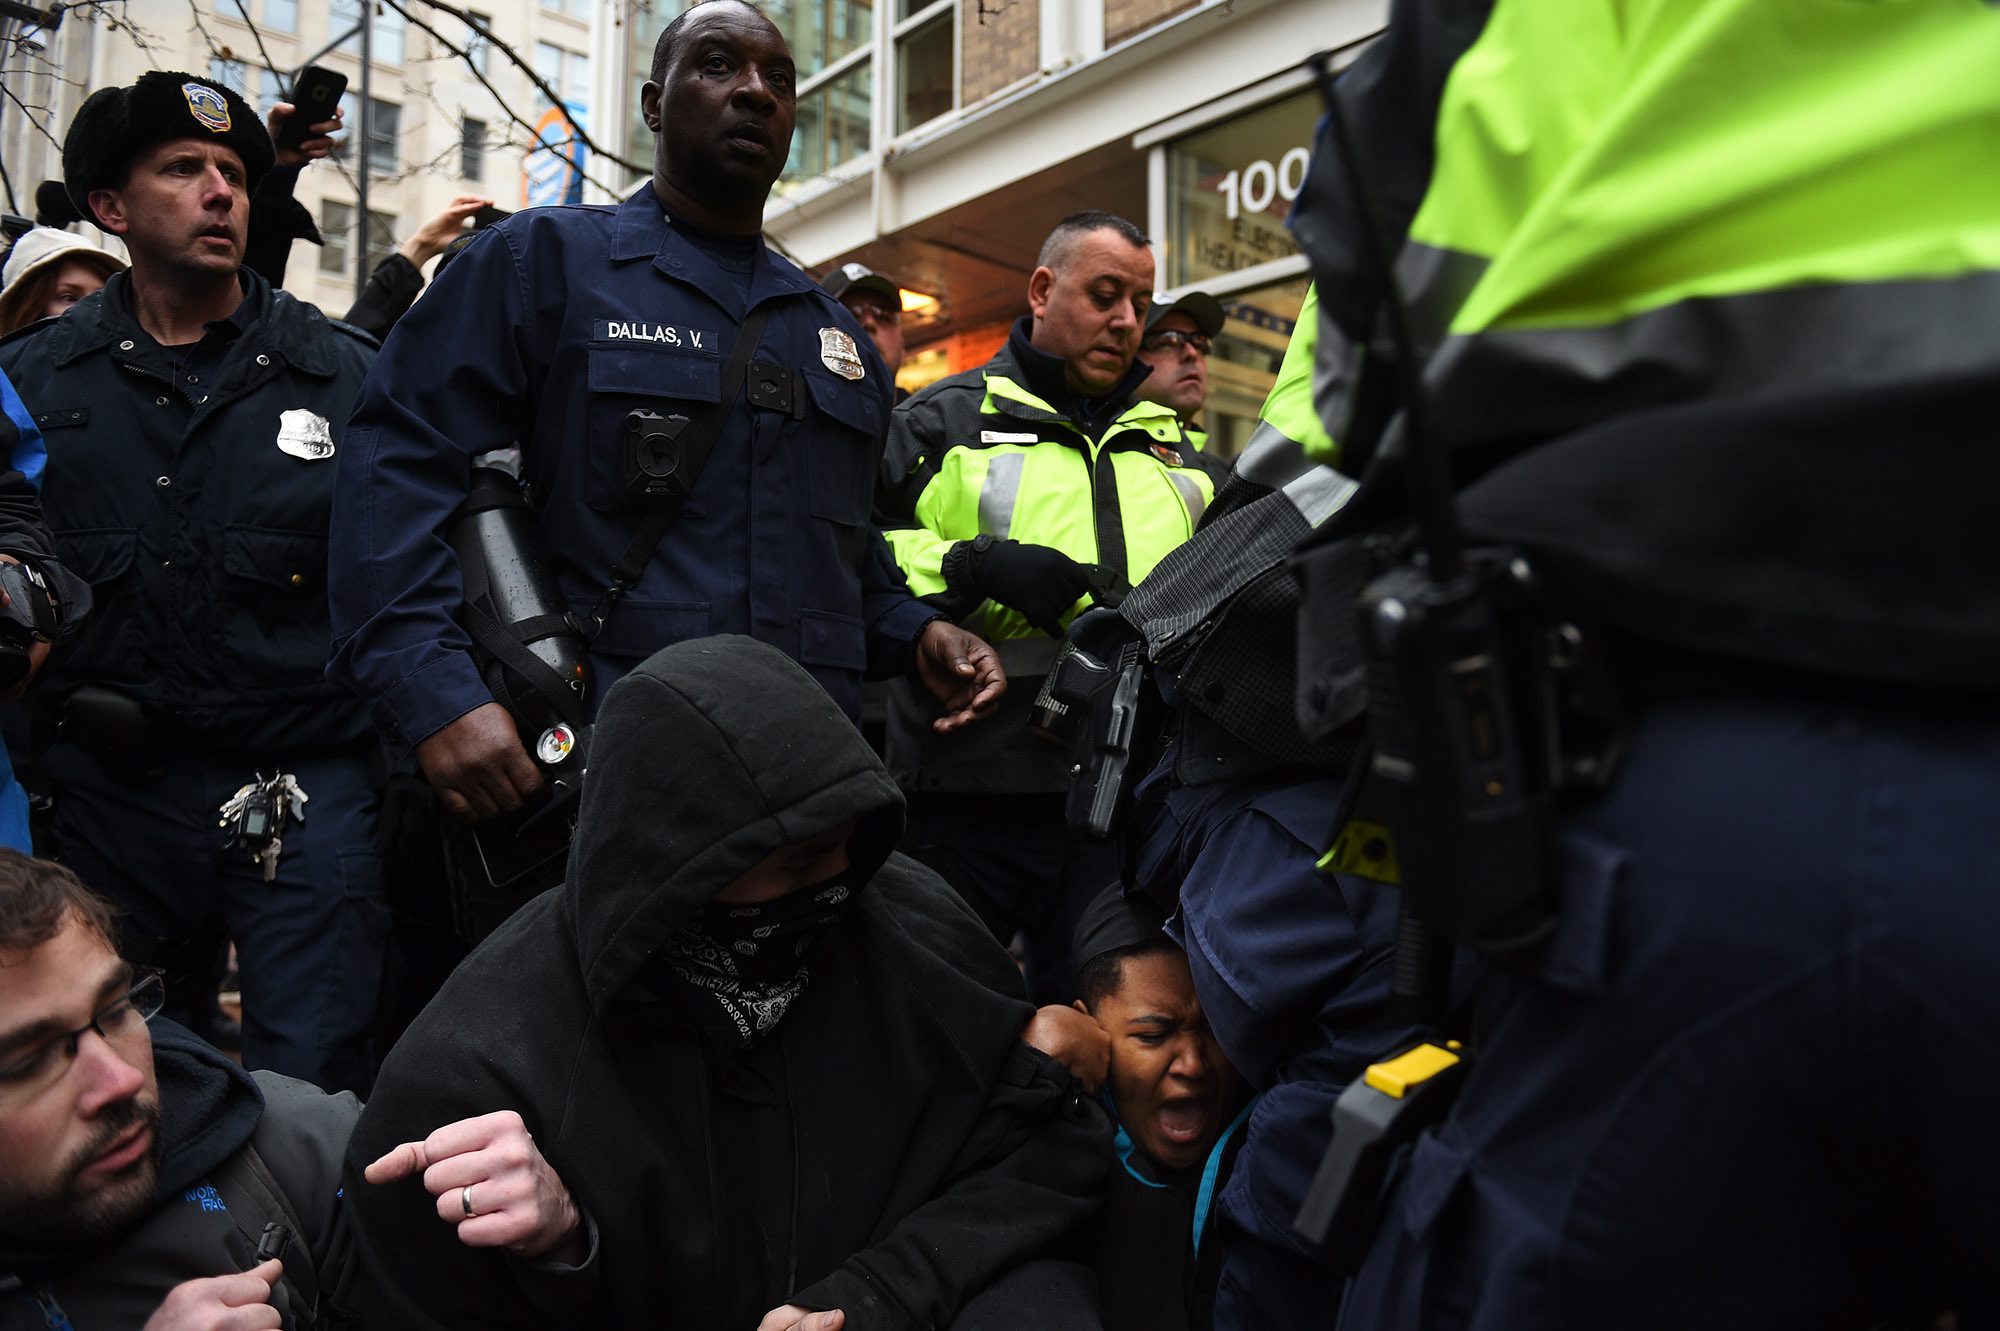 2017-01-20 08:47:14 epa05734768 Police step over demonstrators who block one of the entrances to the route of the inauguration parade at 10th Street near Pennsylvania Avenue to protest Donald J. Trump who will take the oath of office as he is sworn in as the 45th President of the United States in Washington, DC, USA, 20 January 2017. Trump won the 08 November 2016 election to become the next US President. EPA/Astrid Riecken EPA/Astrid Riecken